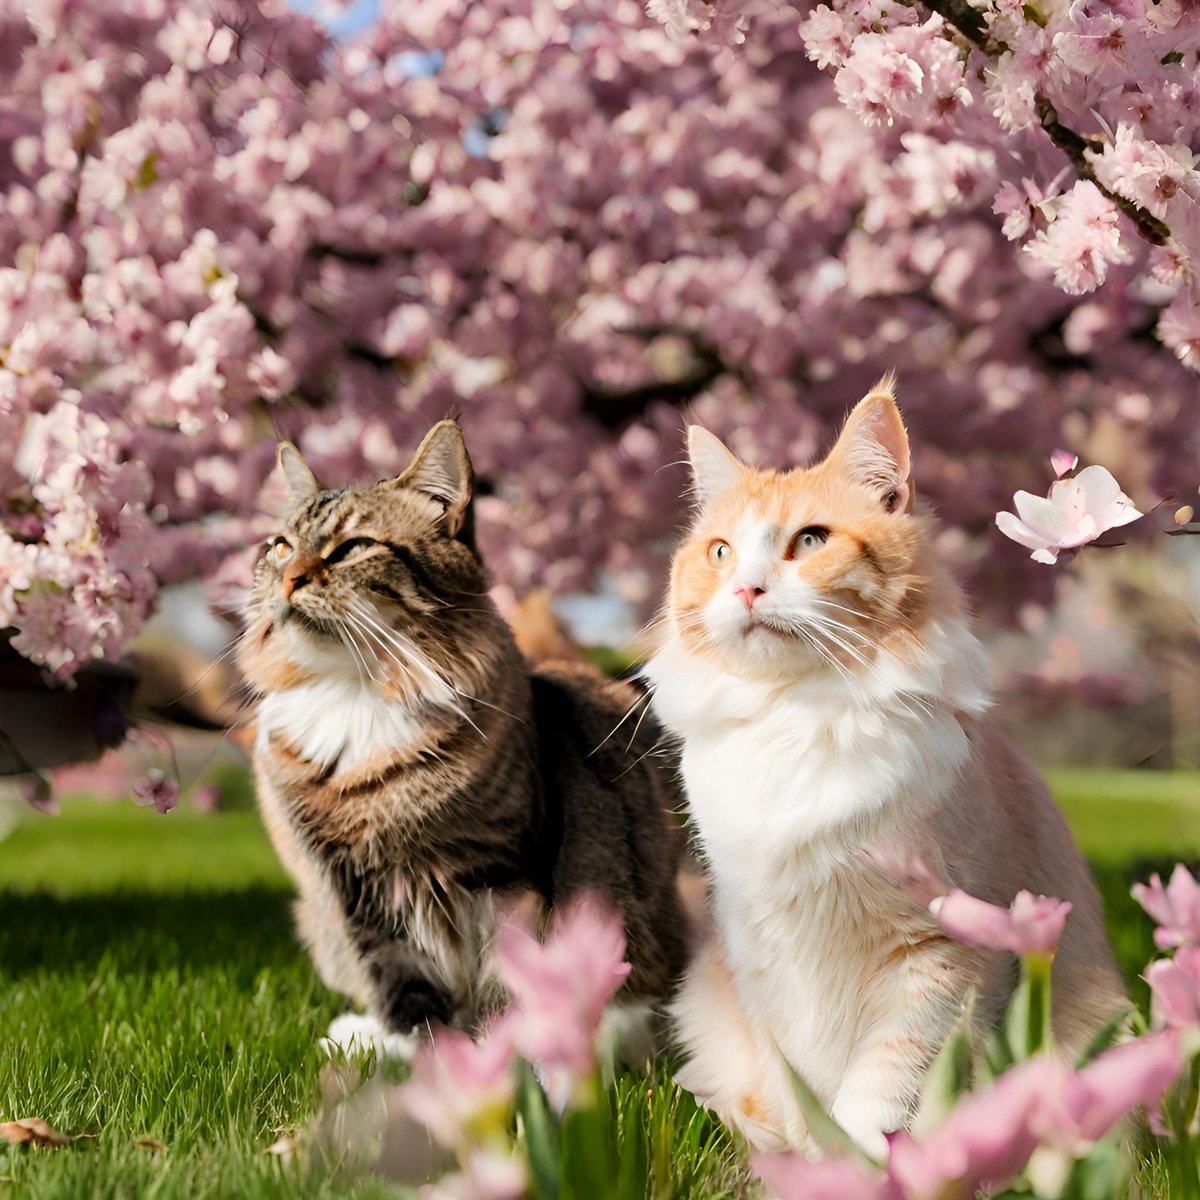 Let your cat's curiosity bloom this spring! 🌸 Take them on a leashed adventure among the flowers and watch their wonder grow. #CatsOfSpring #LeashLife #PurrfectDayOut